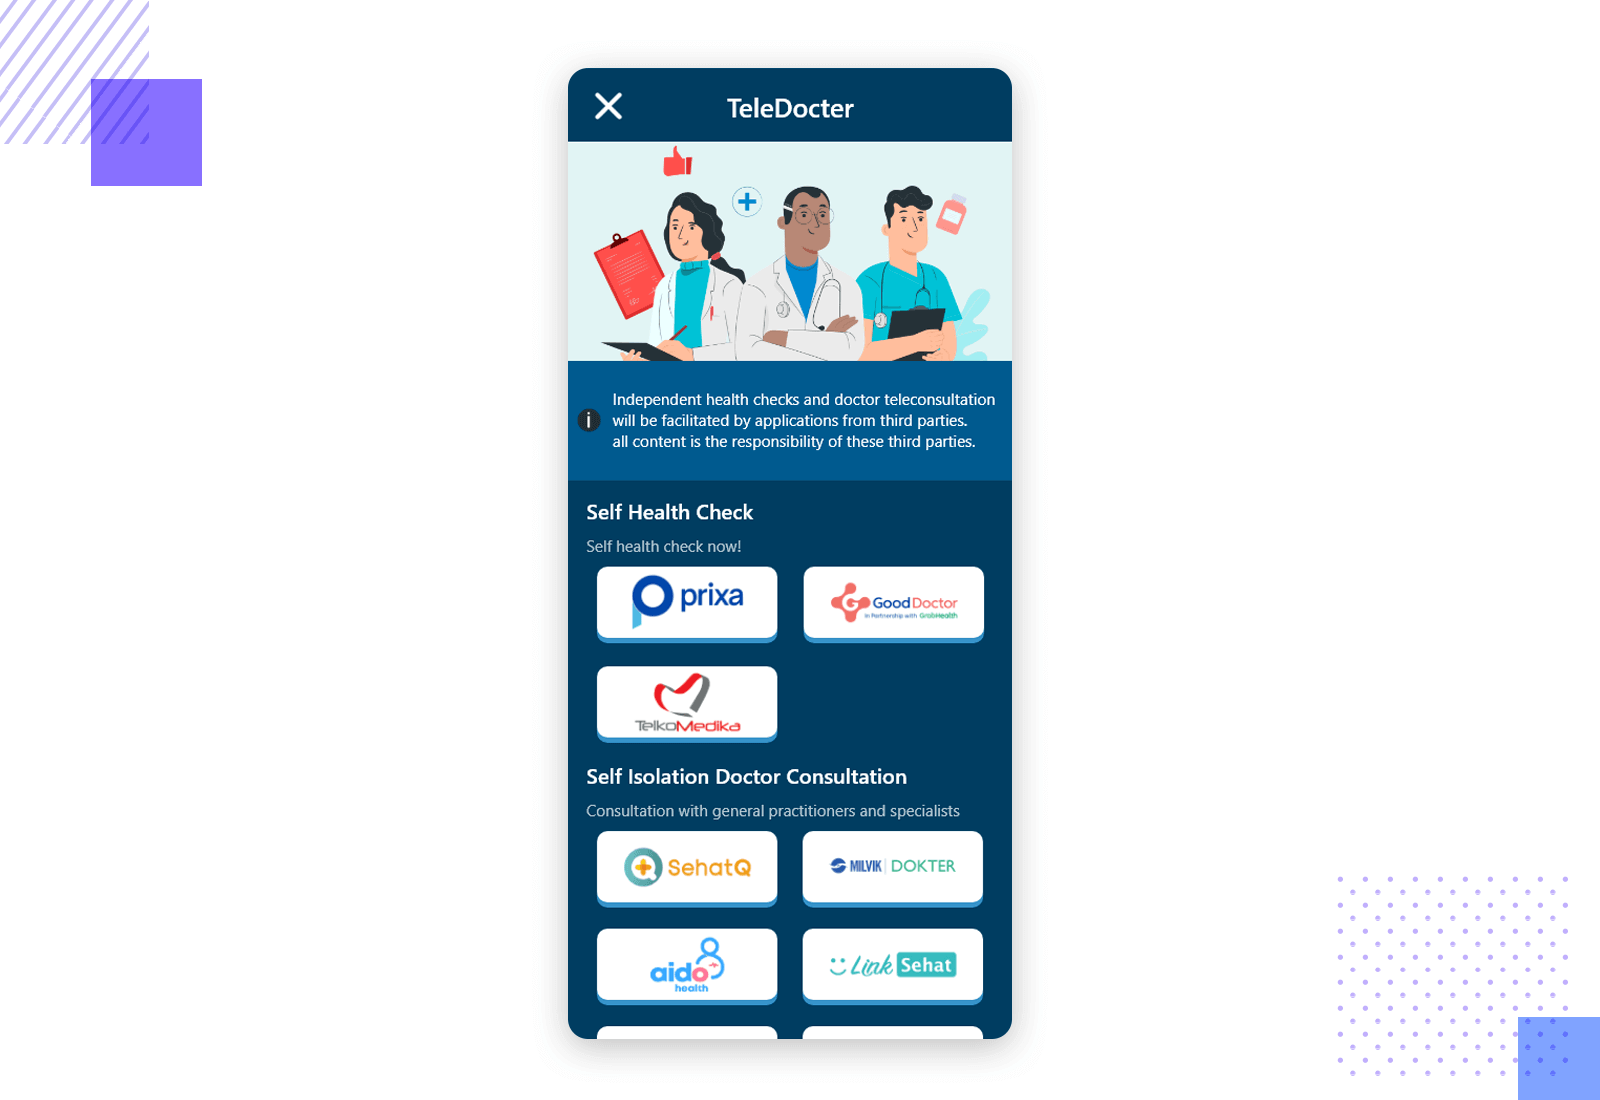 Telehealth UI design showing self-health check and isolation consultation options with a blue theme